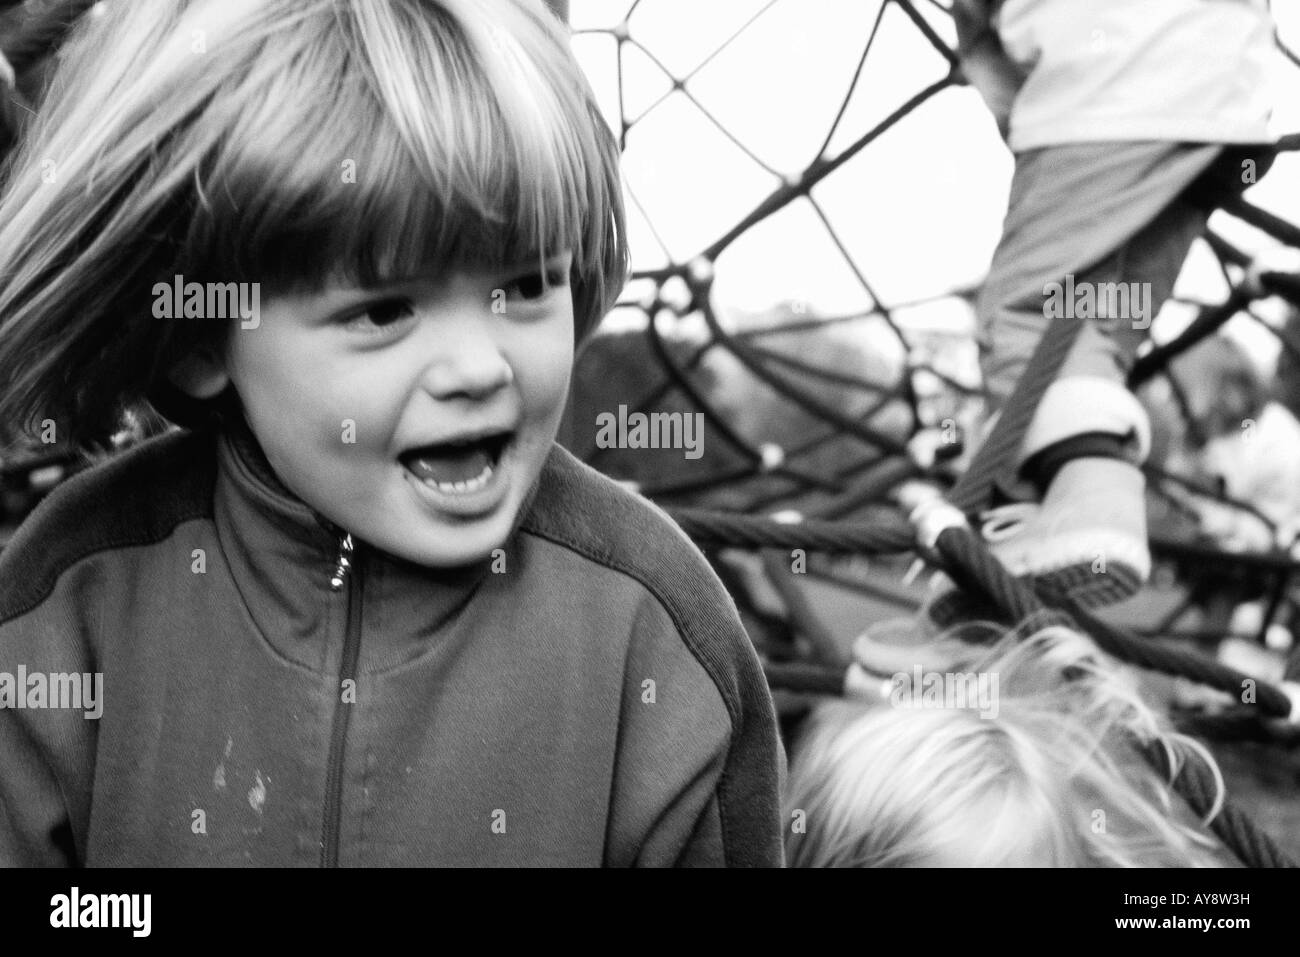 Child on playground looking away, hair tousled by wind, close-up Stock Photo